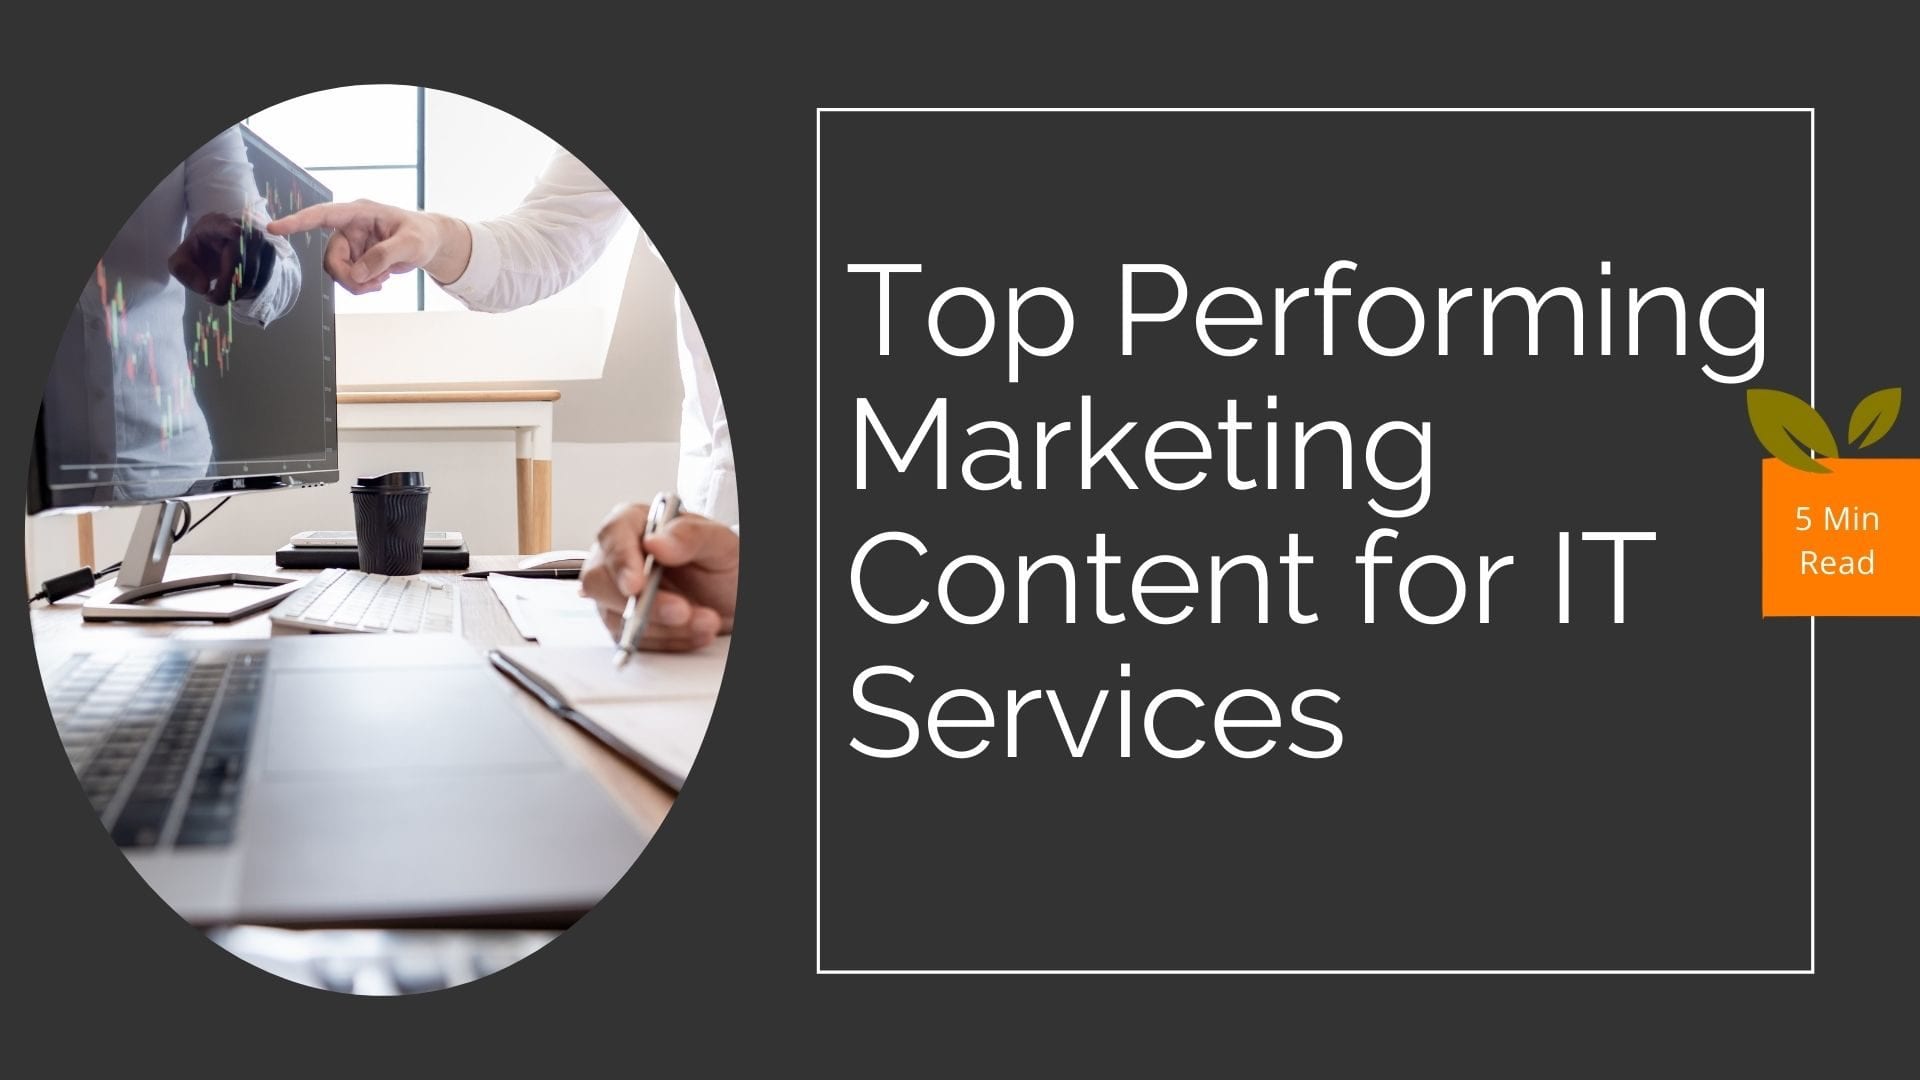 Marketing Content for IT Services